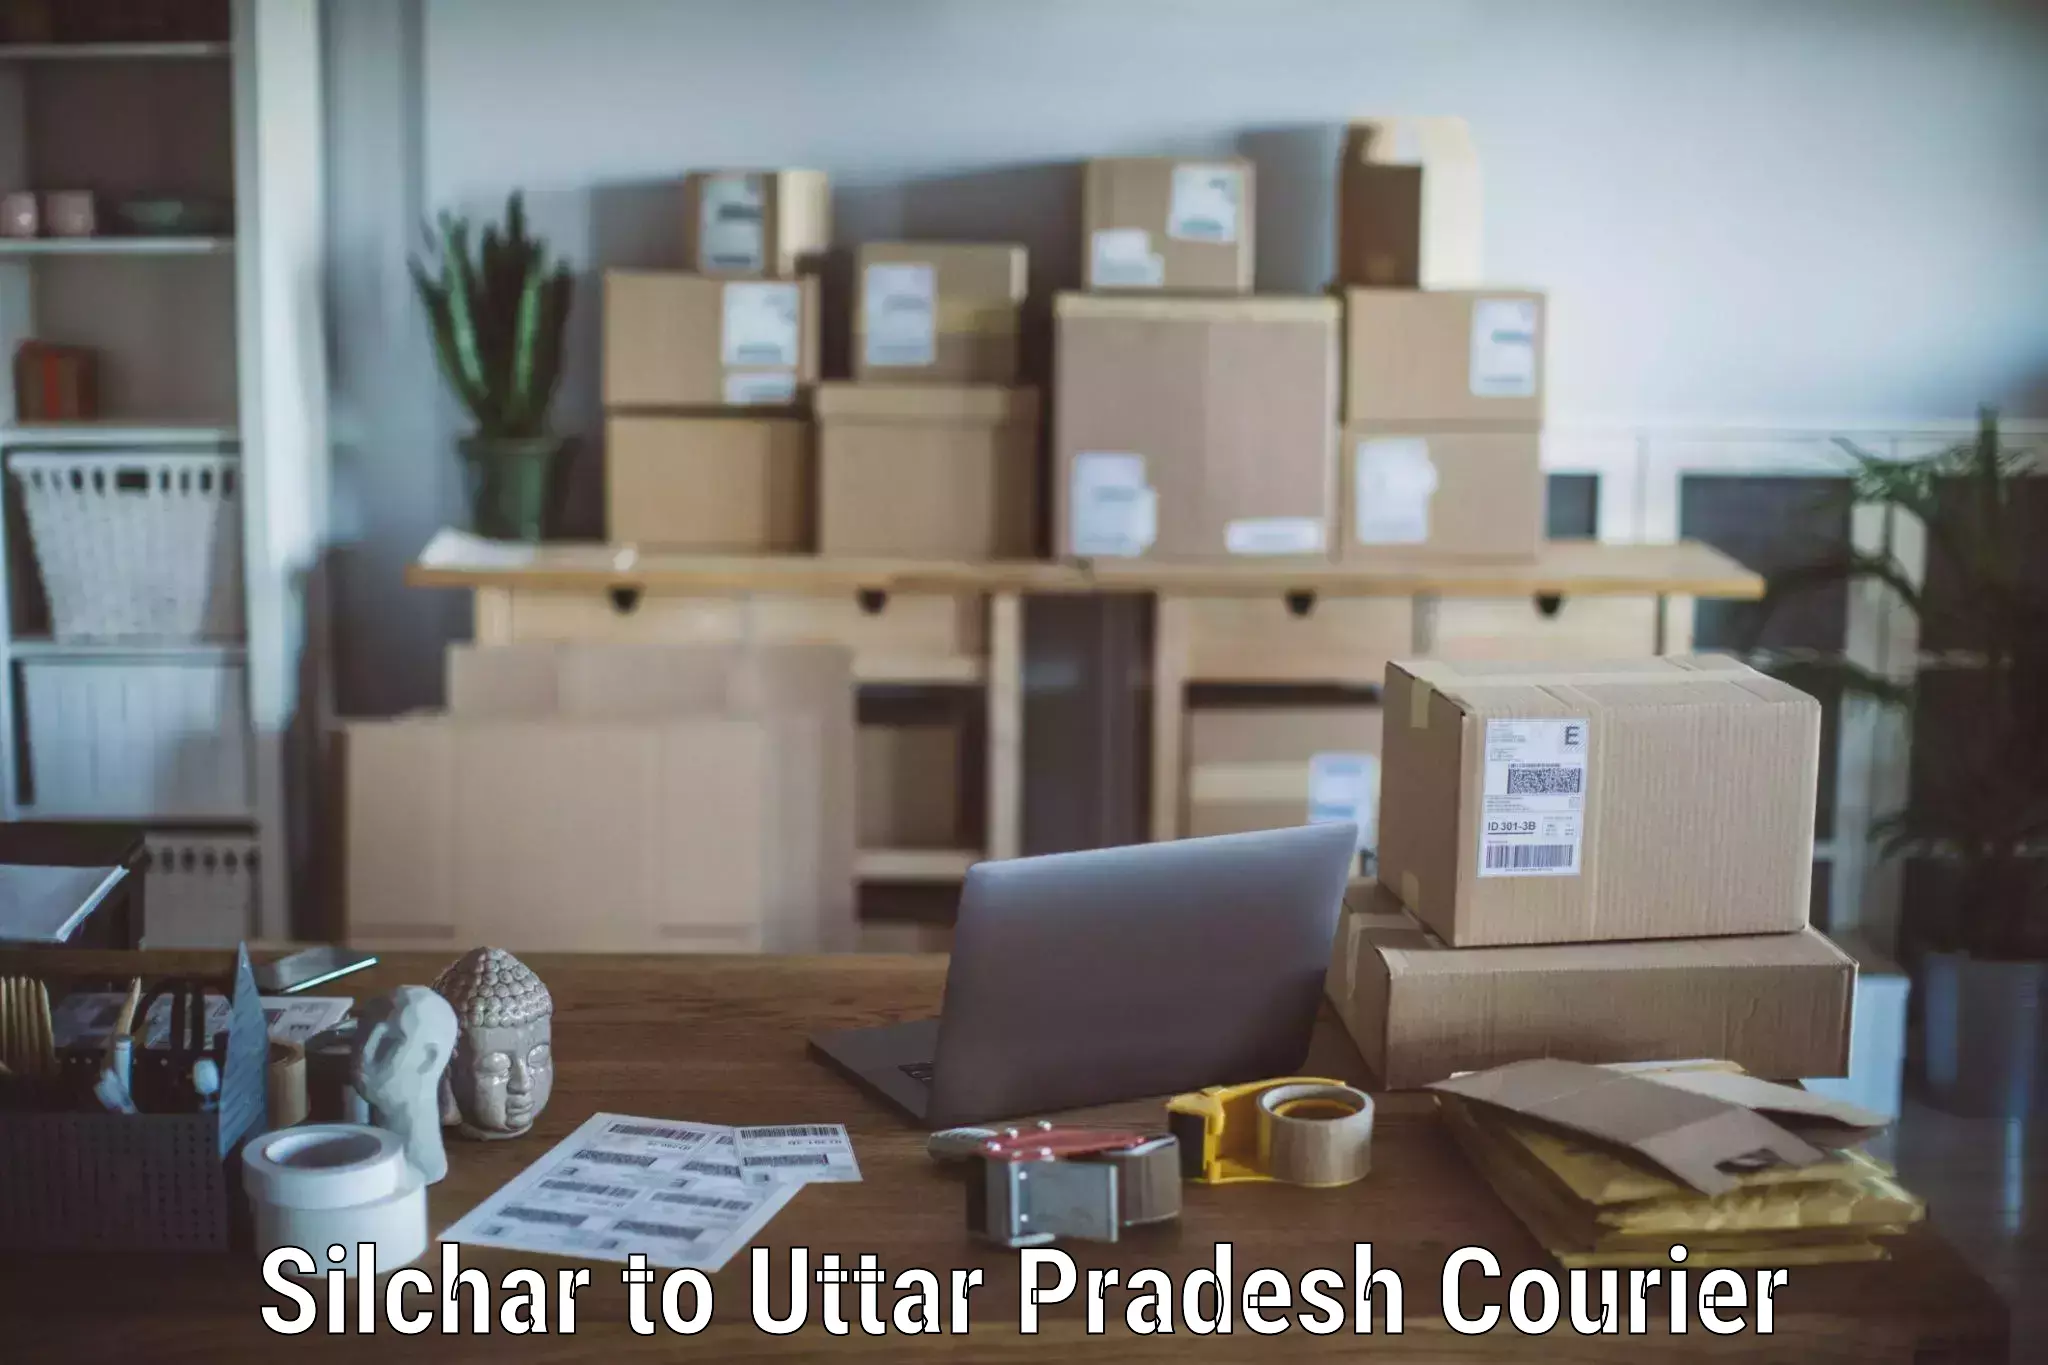 Budget-friendly movers Silchar to Firozabad